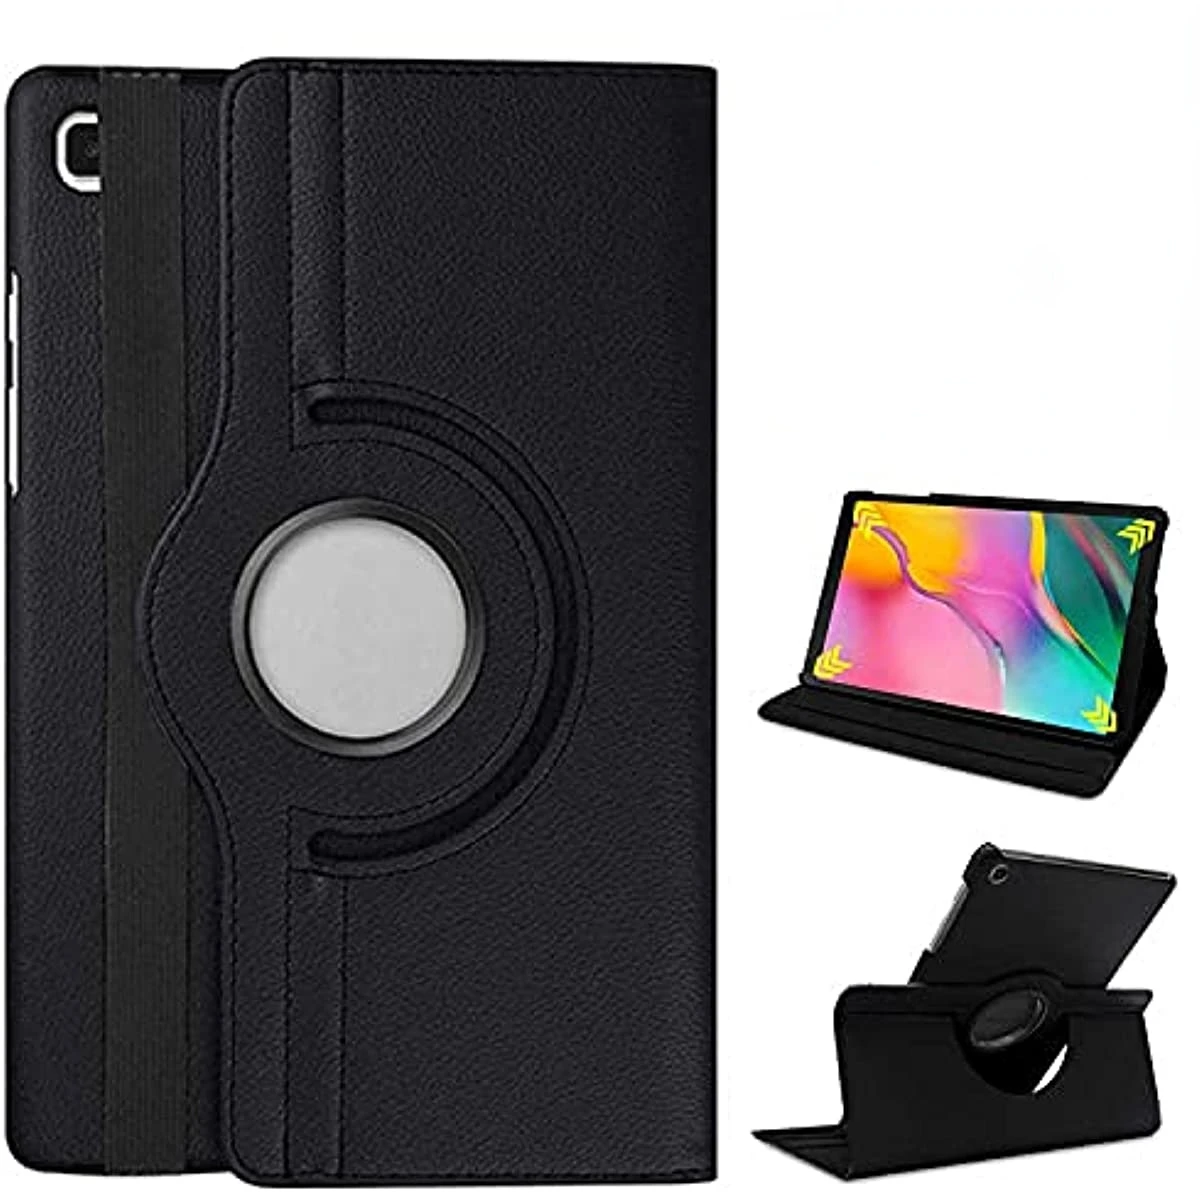 

360 Degree Rotating Case for Samsung Galaxy Tab S5e 10.5 2019 SM-T720 T725 Tablet Folding Stand Smart Book Cover Auto Sleep/Wake